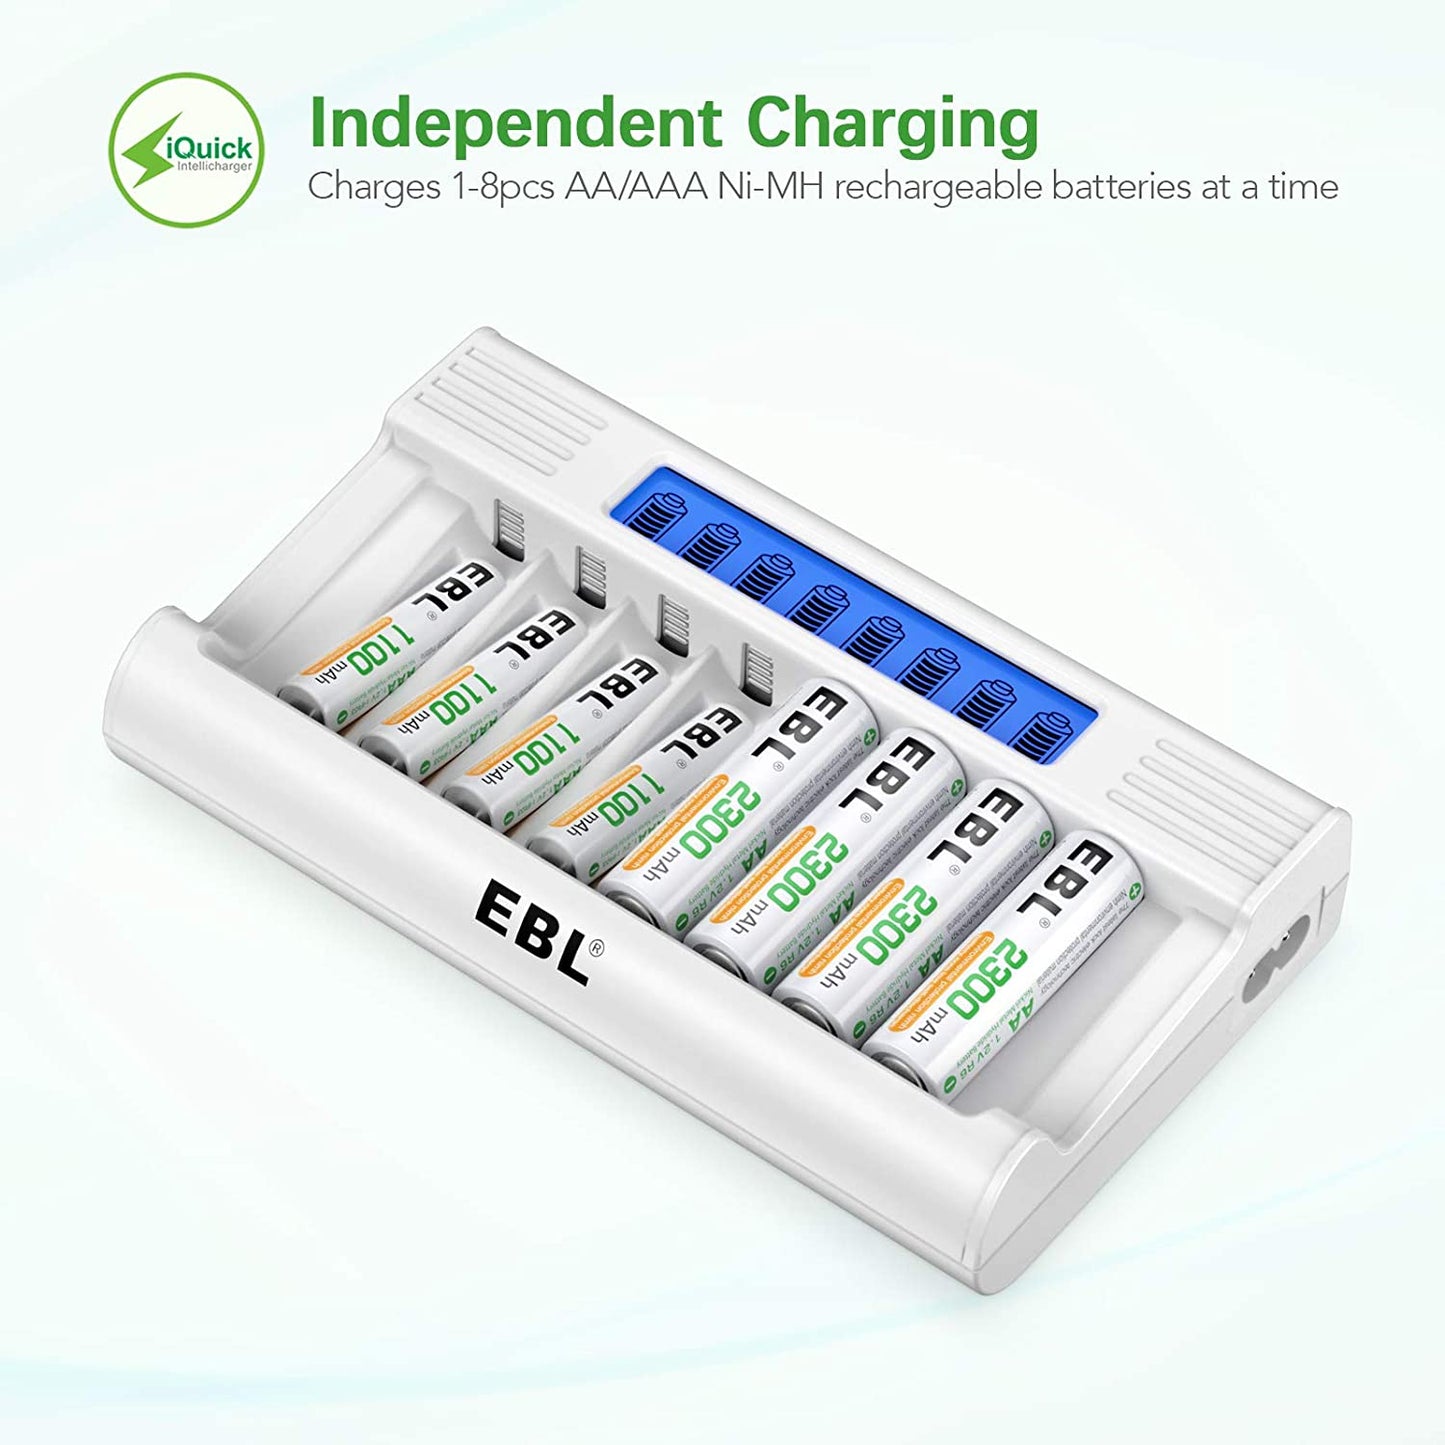 EBL TB-6076 8-Bay Smart Battery Charger with LCD Status Display, Independent Charging Slots, and Intelligent Overcurrent Protection for AA, AAA Ni-NH Rechargeable Batteries